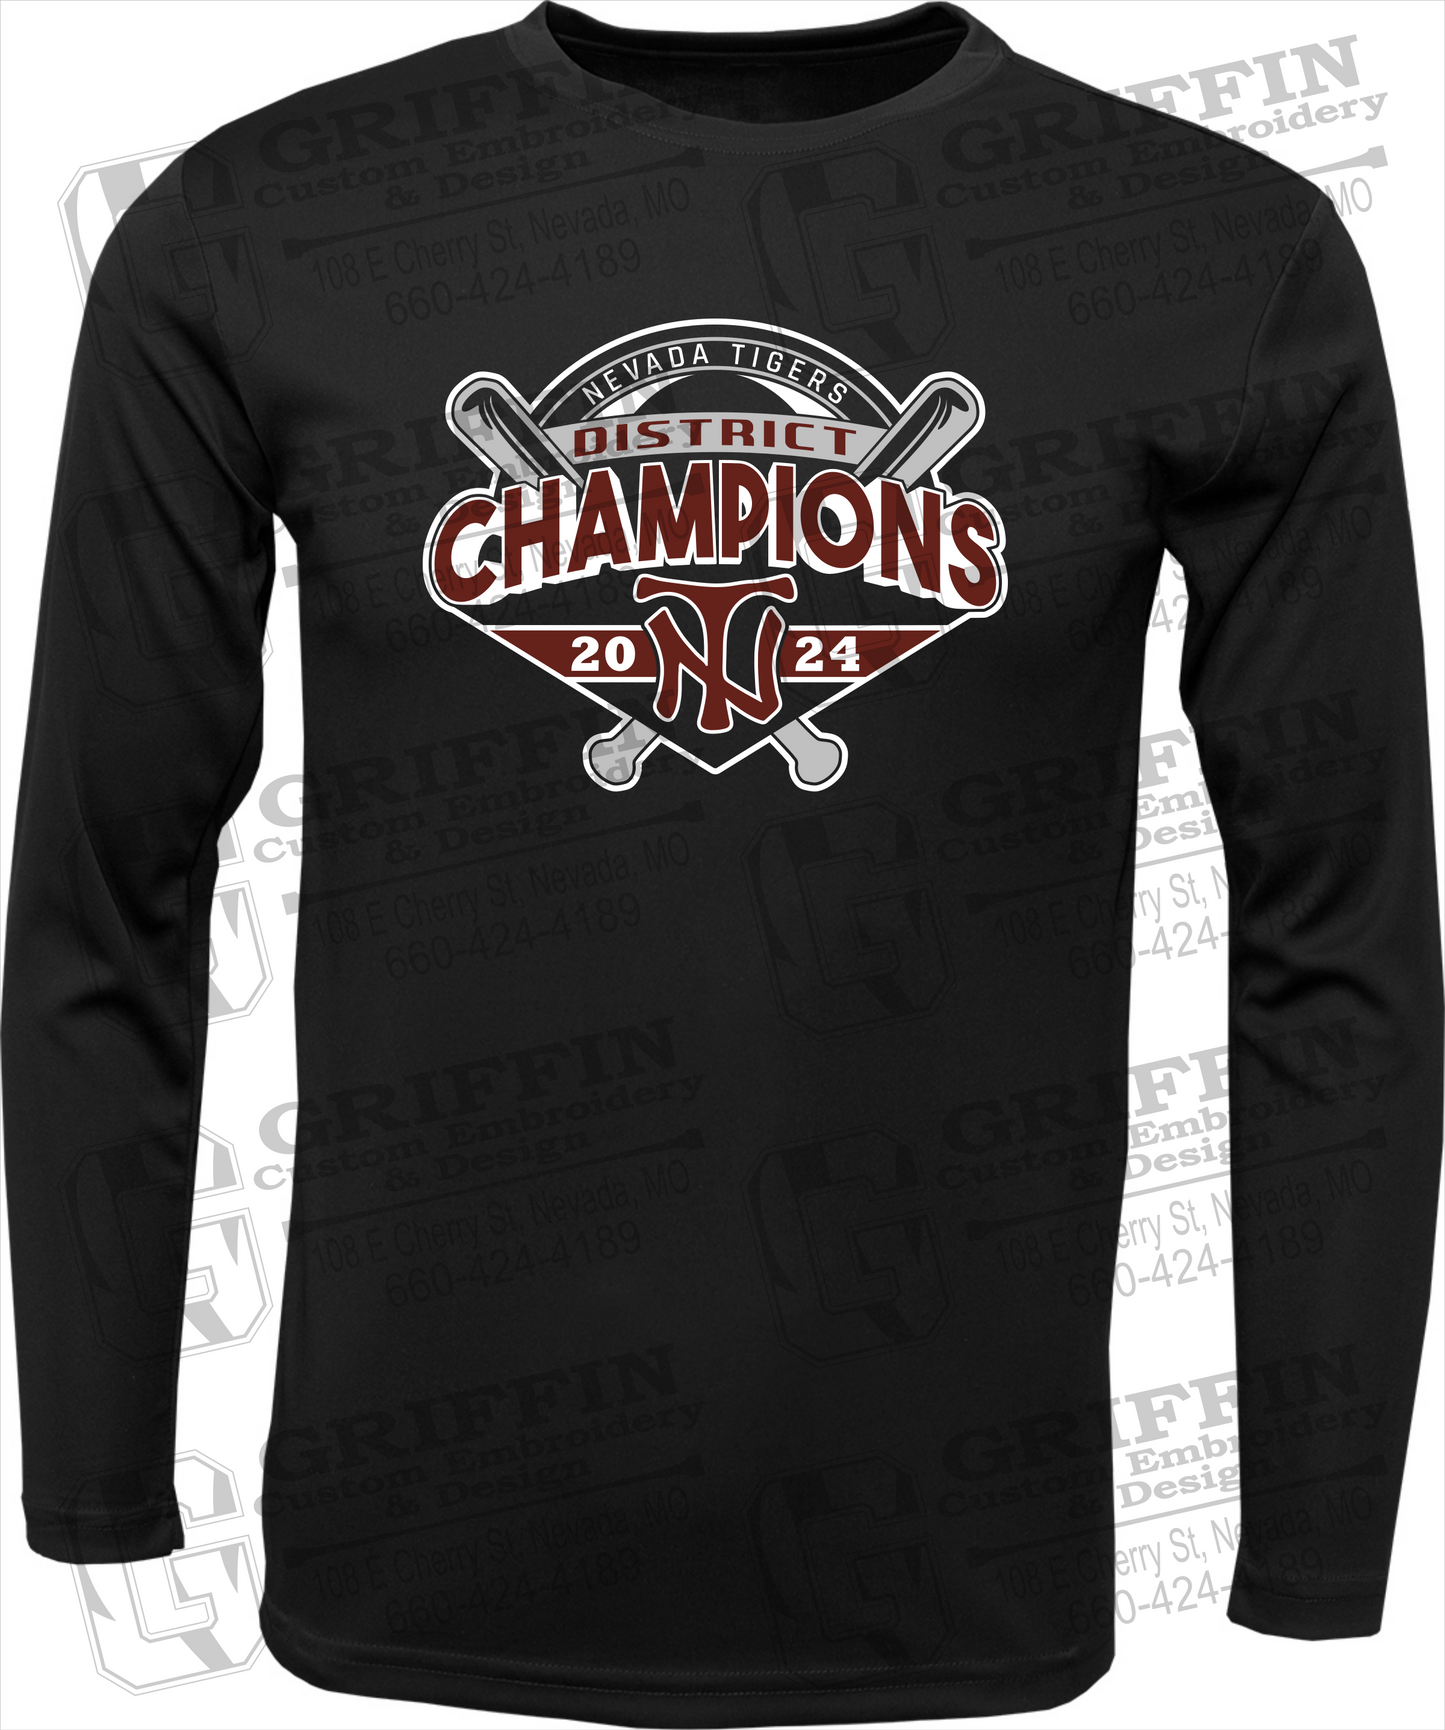 Toddler Dry-Fit Long Sleeve T-Shirt - Baseball District Champs 2024 - Nevada Tigers 25-C